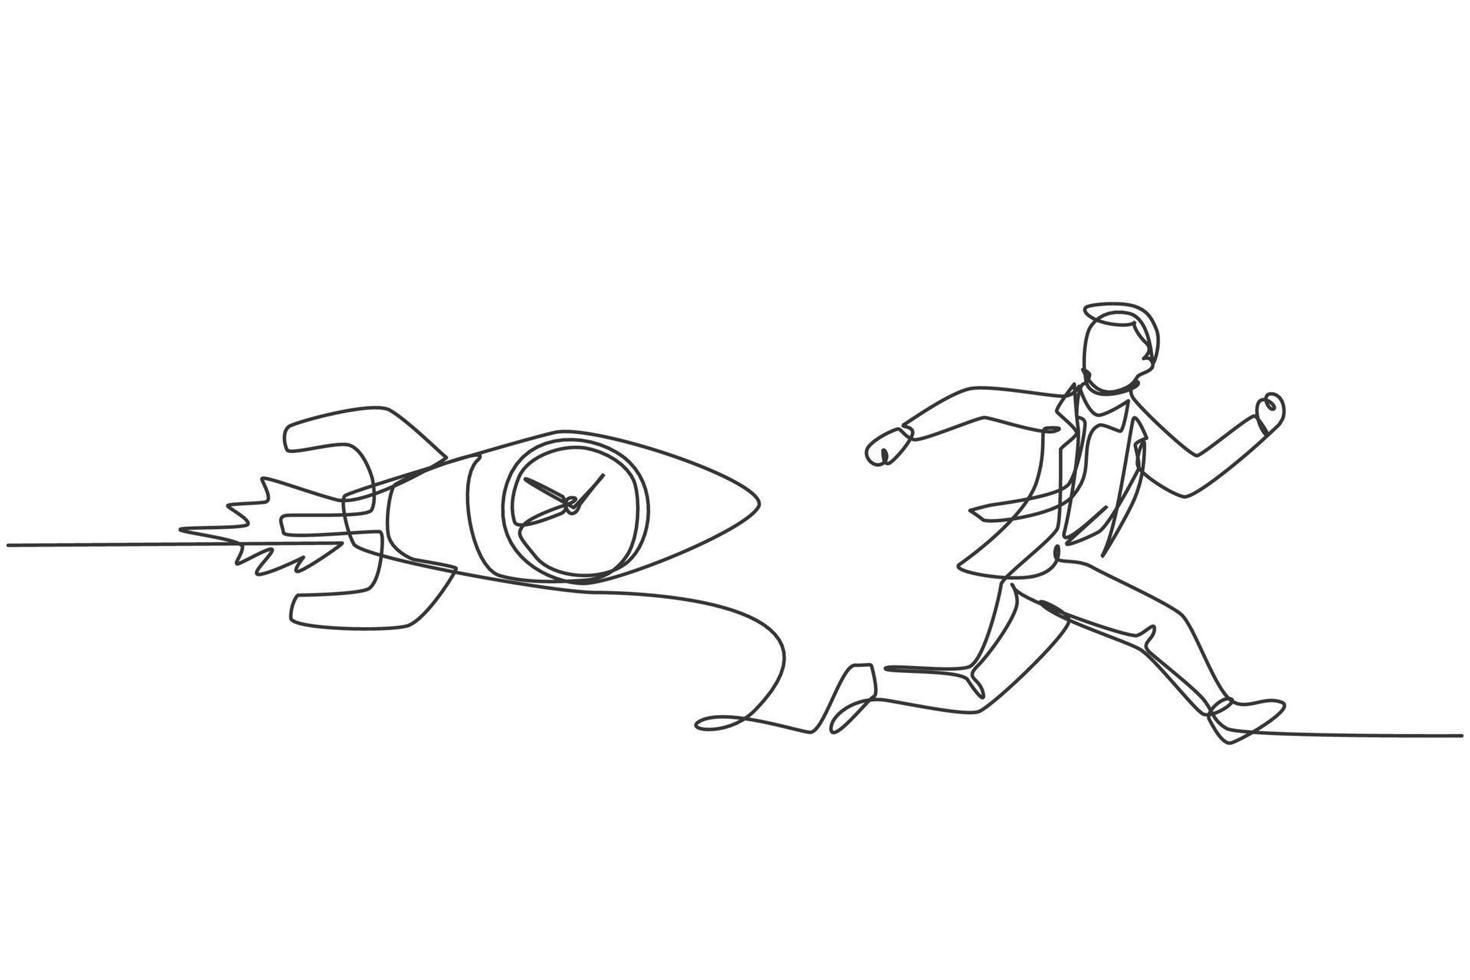 Continuous one line drawing young male worker chased by flying rocket with analog clock inside. Rush hour management business minimalist concept. Single line draw design vector graphic illustration